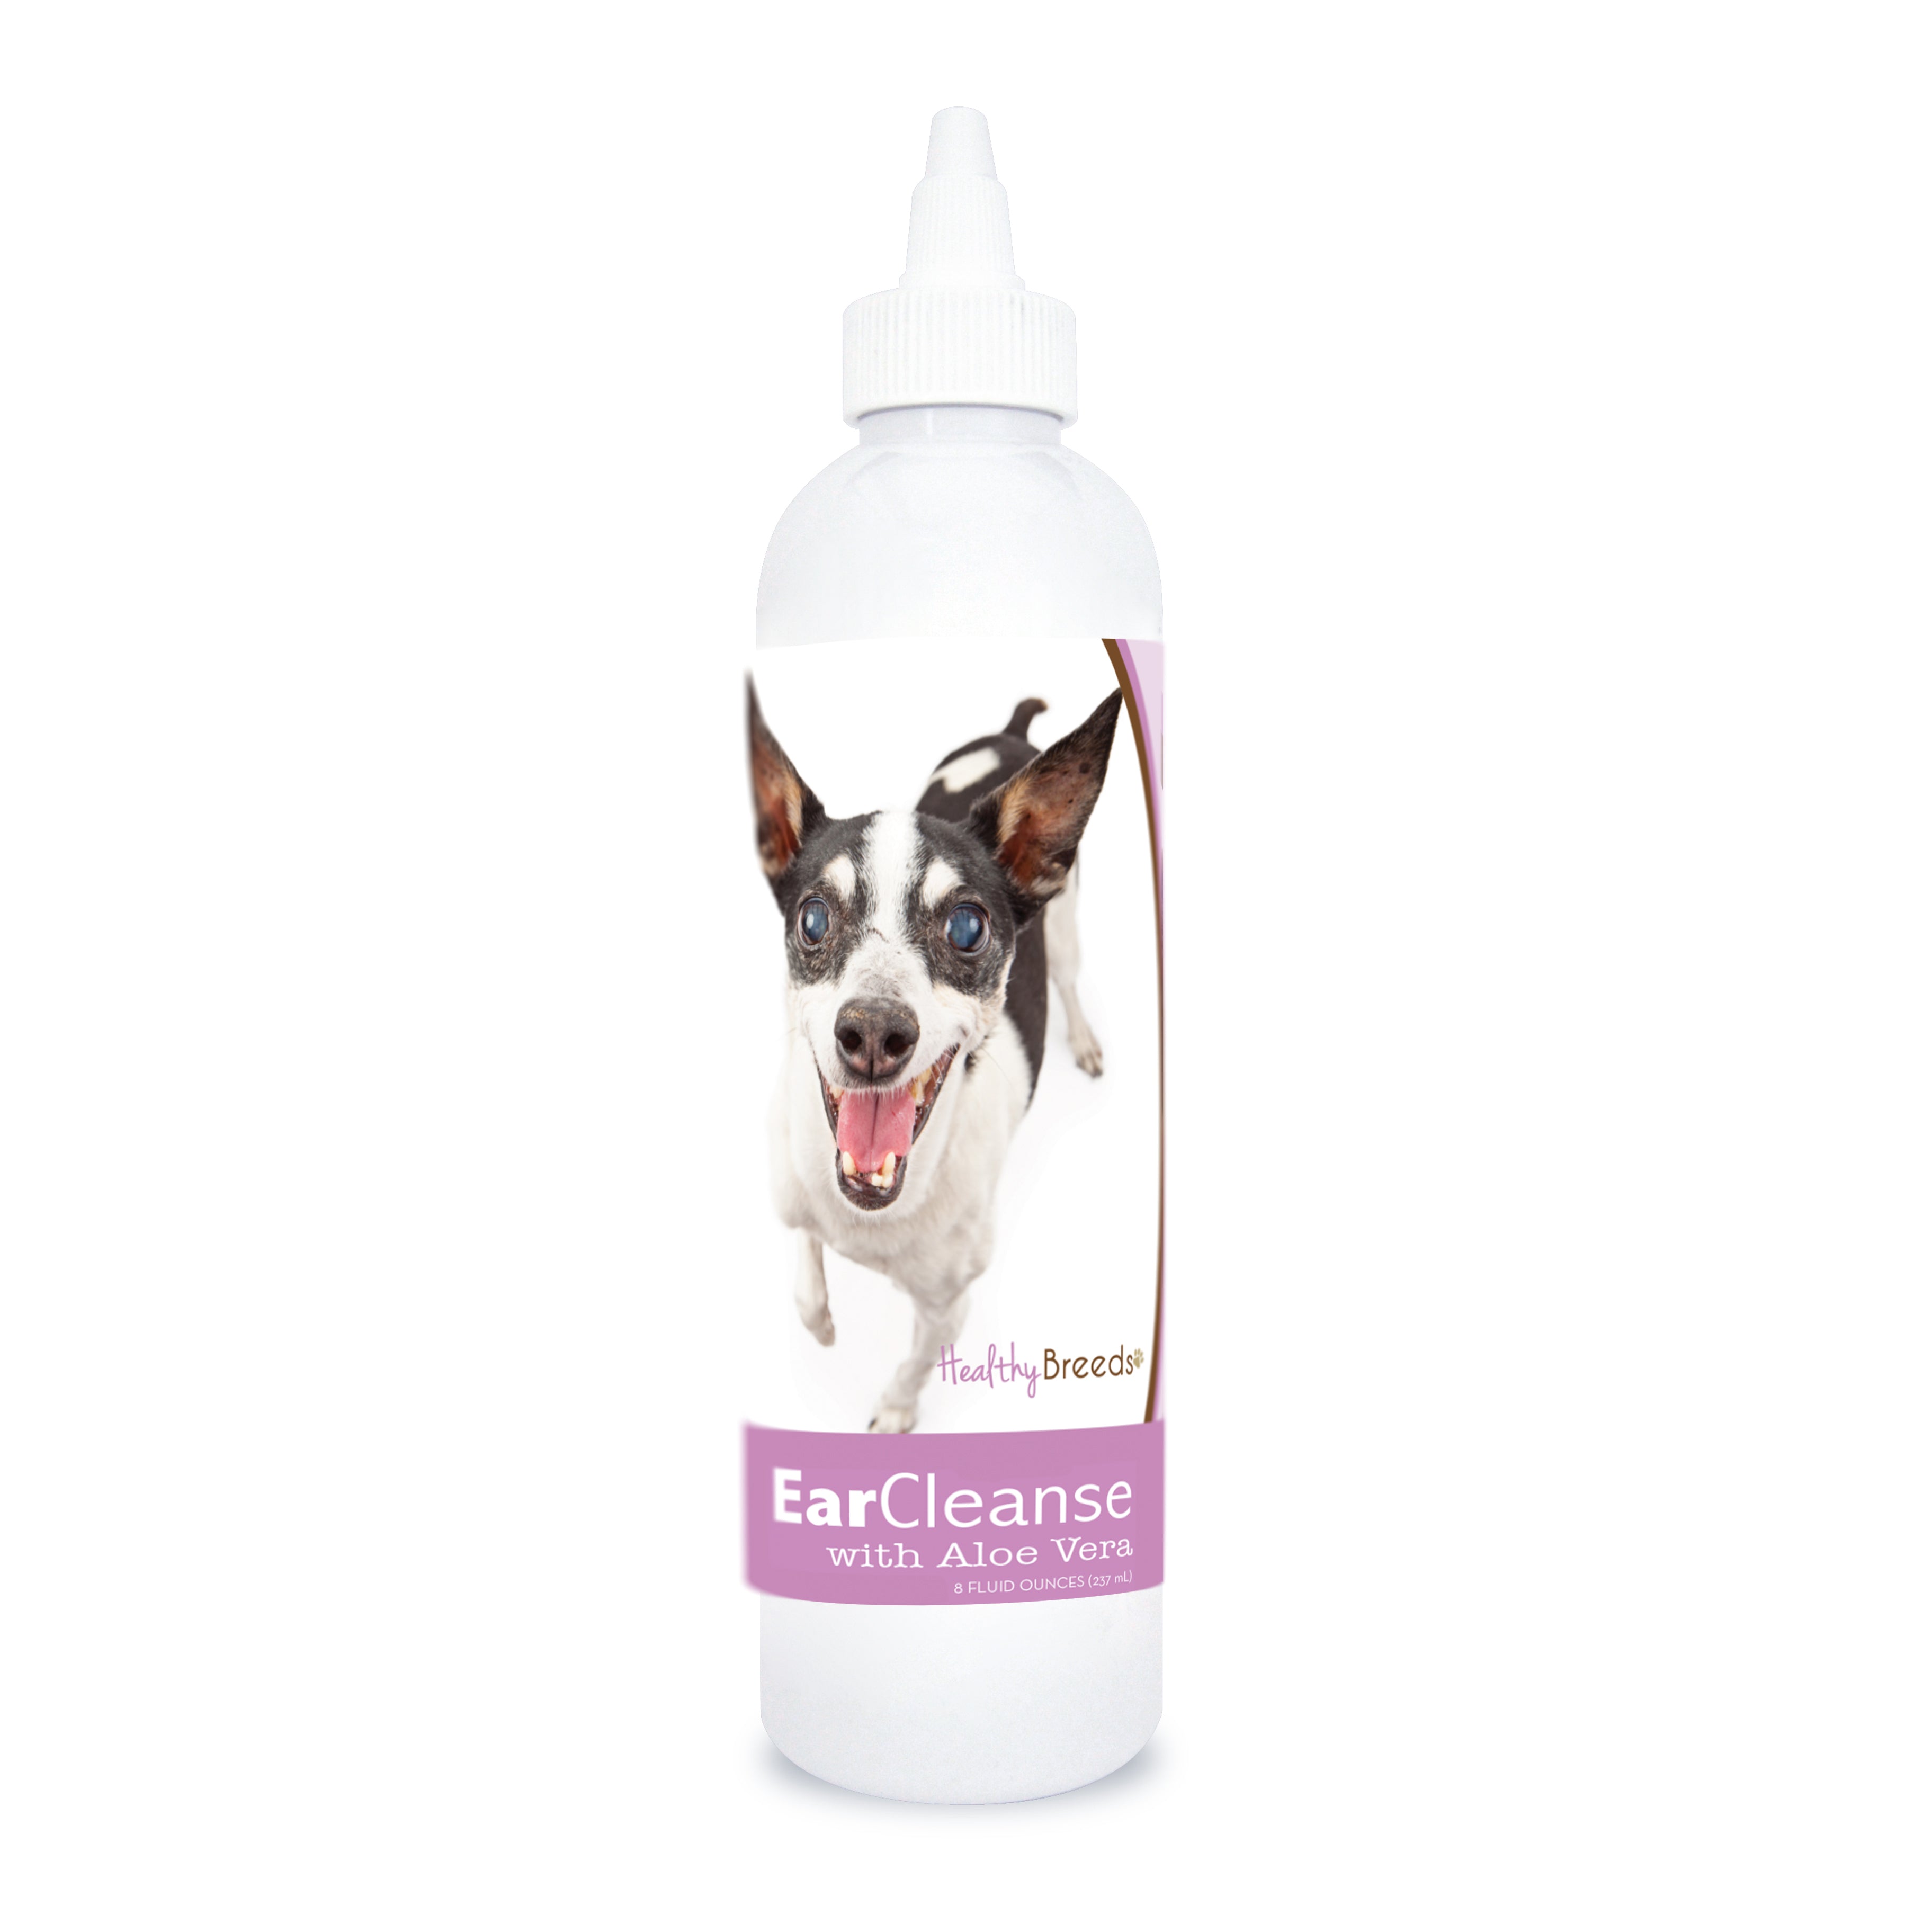 Rat Terrier Ear Cleanse with Aloe Vera Sweet Pea and Vanilla 8 oz